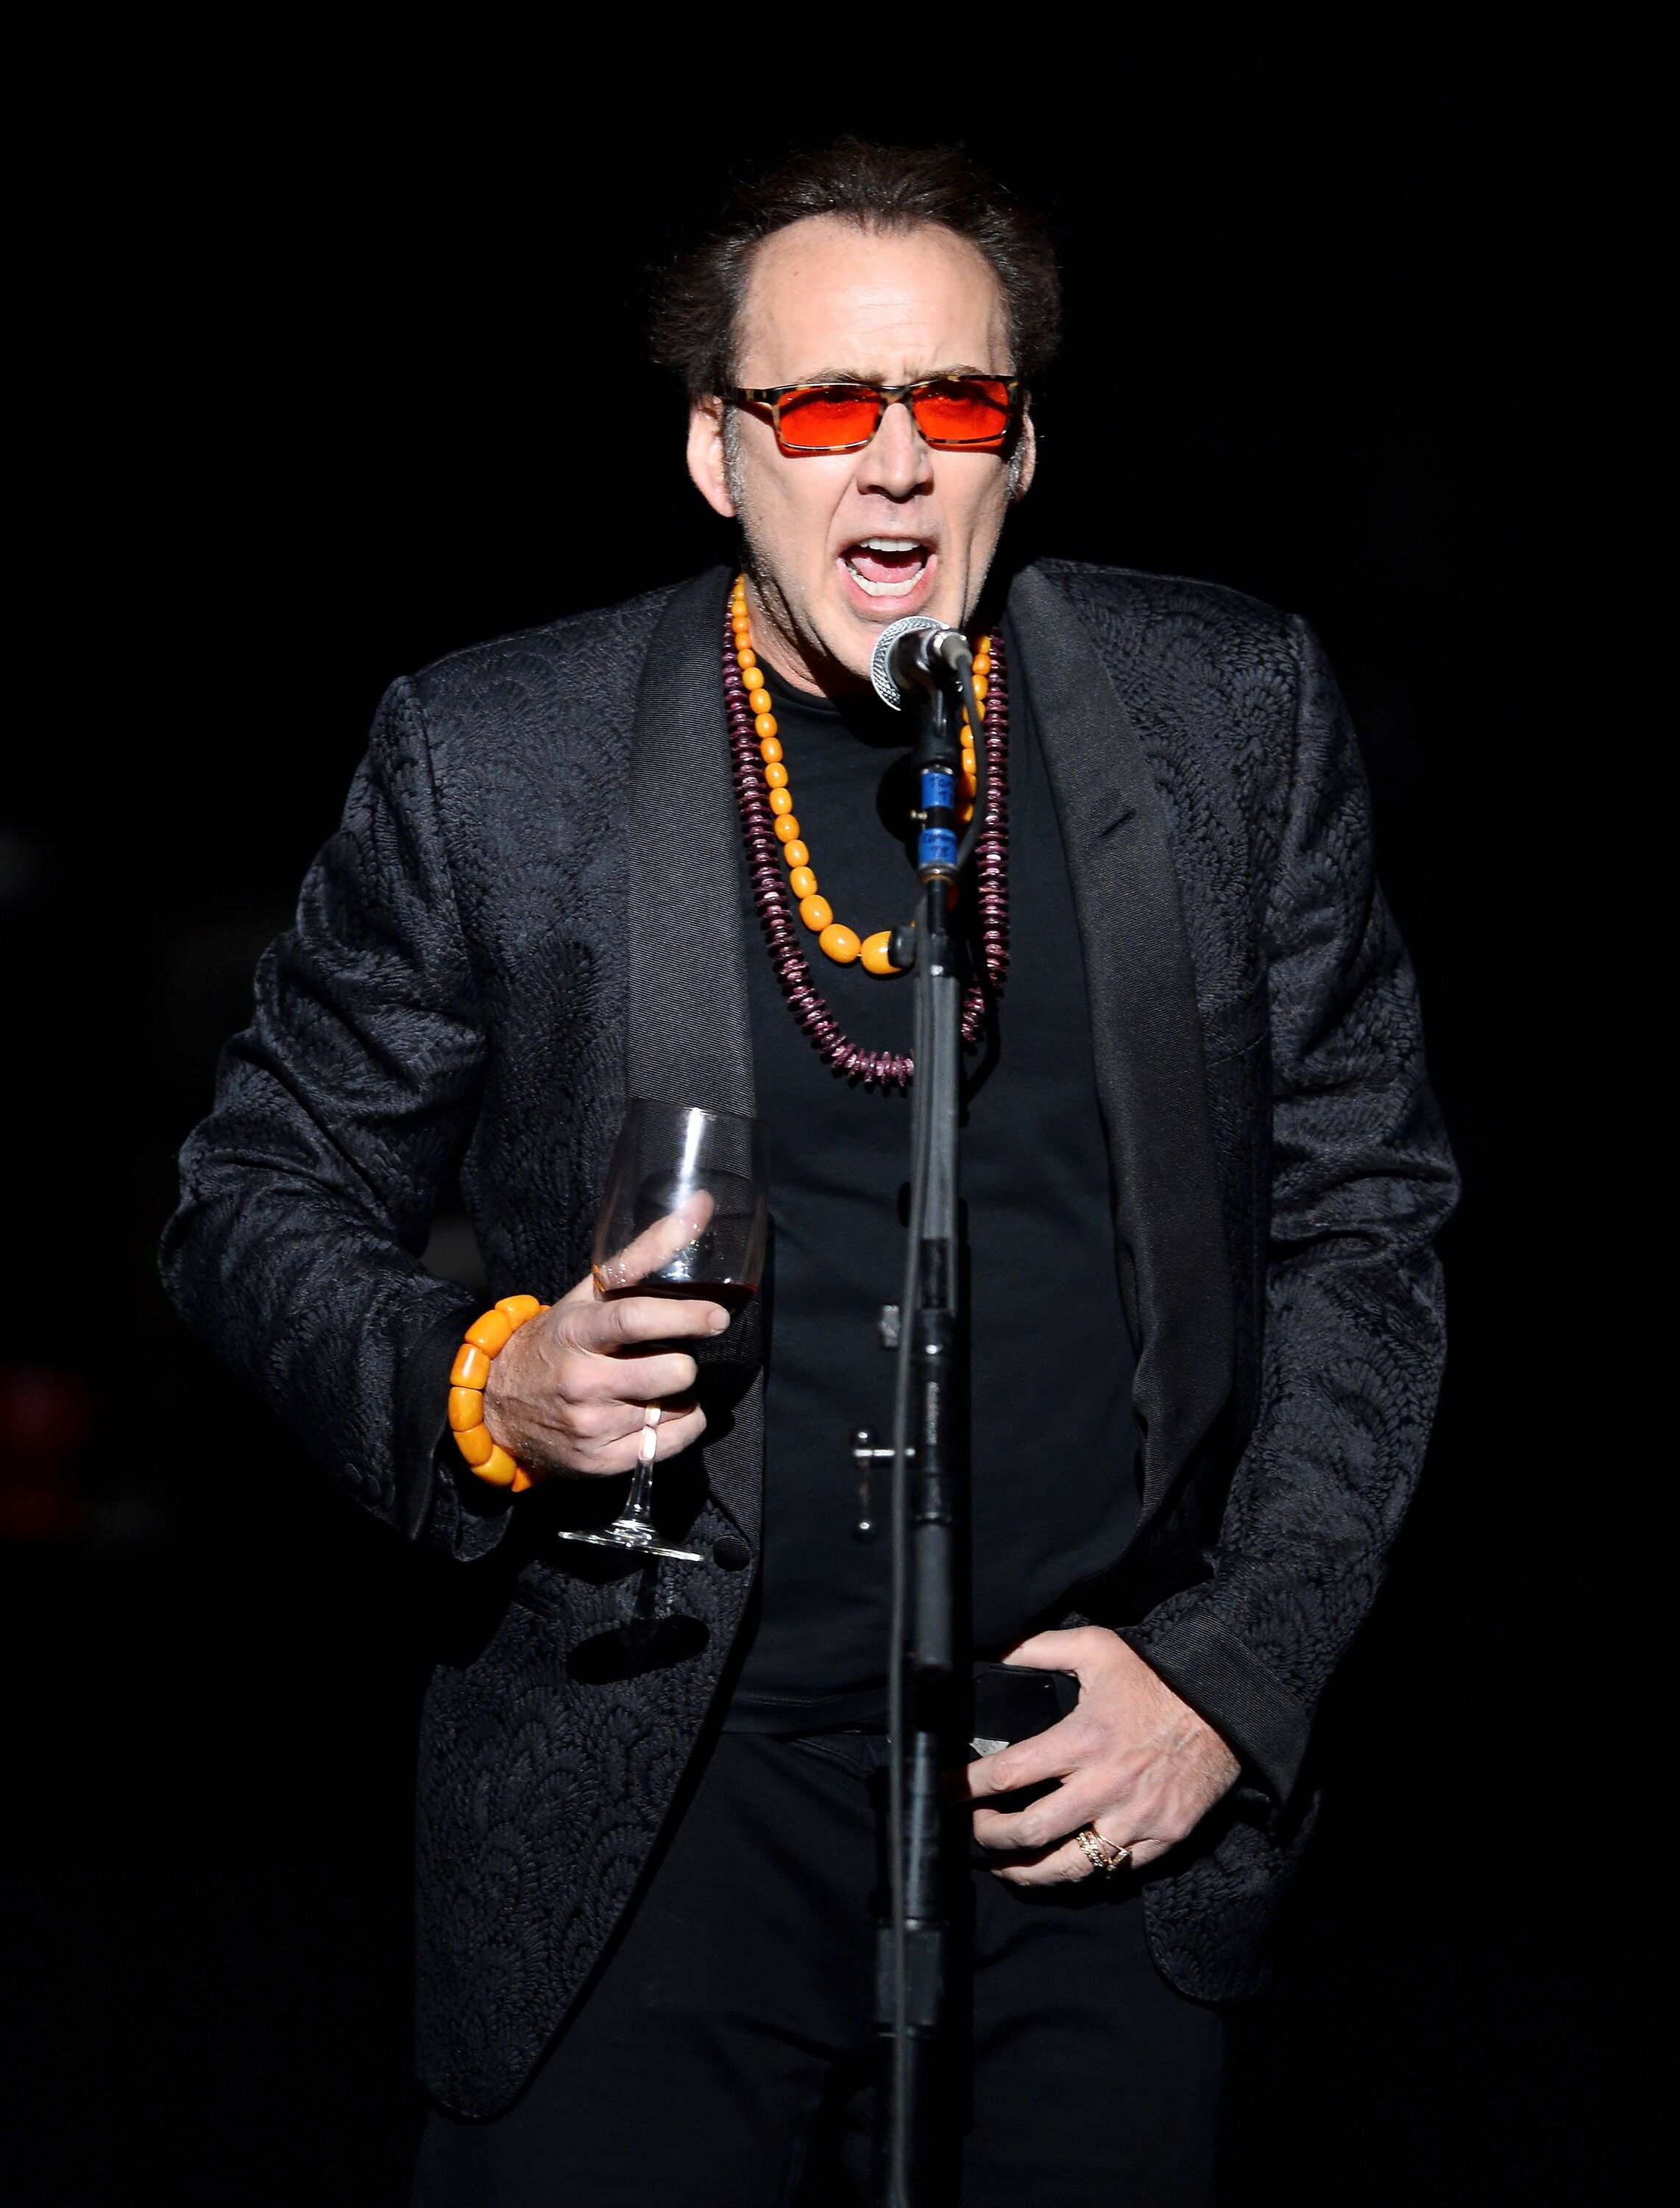 Nicolas Cage introduces Guns N' Roses at The Joint inside the Hard Rock Hotel & Casino during the opening night of the band's second residency. | Source: Getty Images